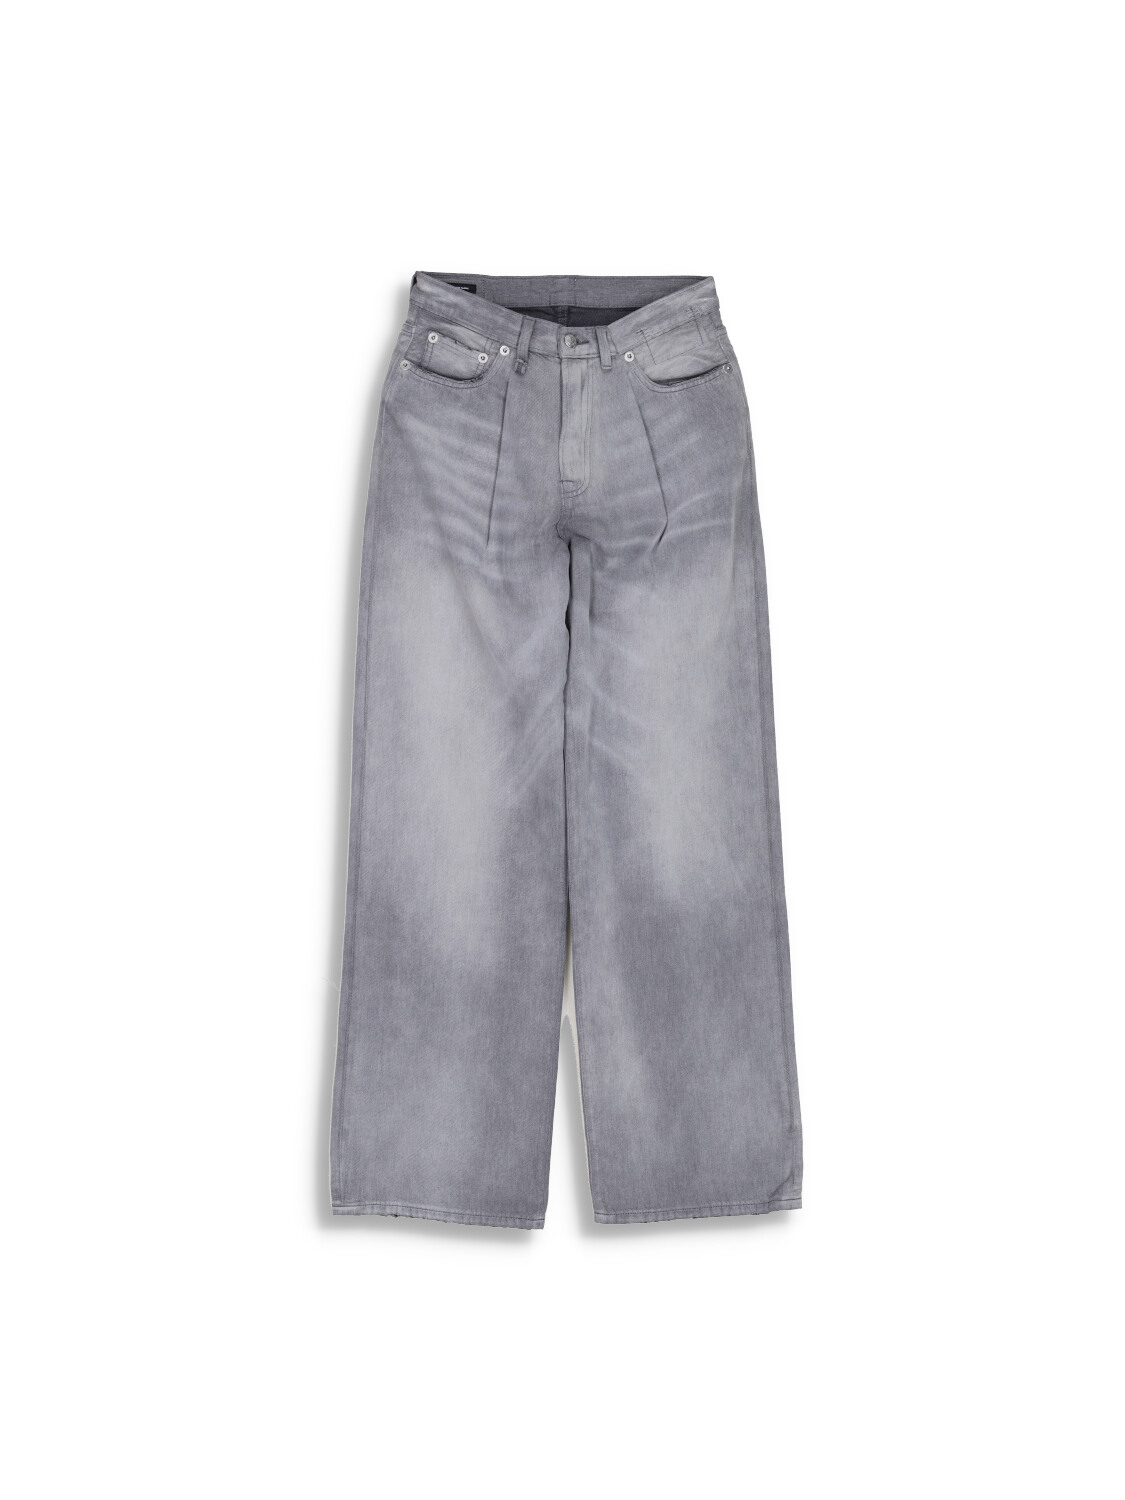 R13 Damon - Jeans trousers with pleat and flared leg grey 26